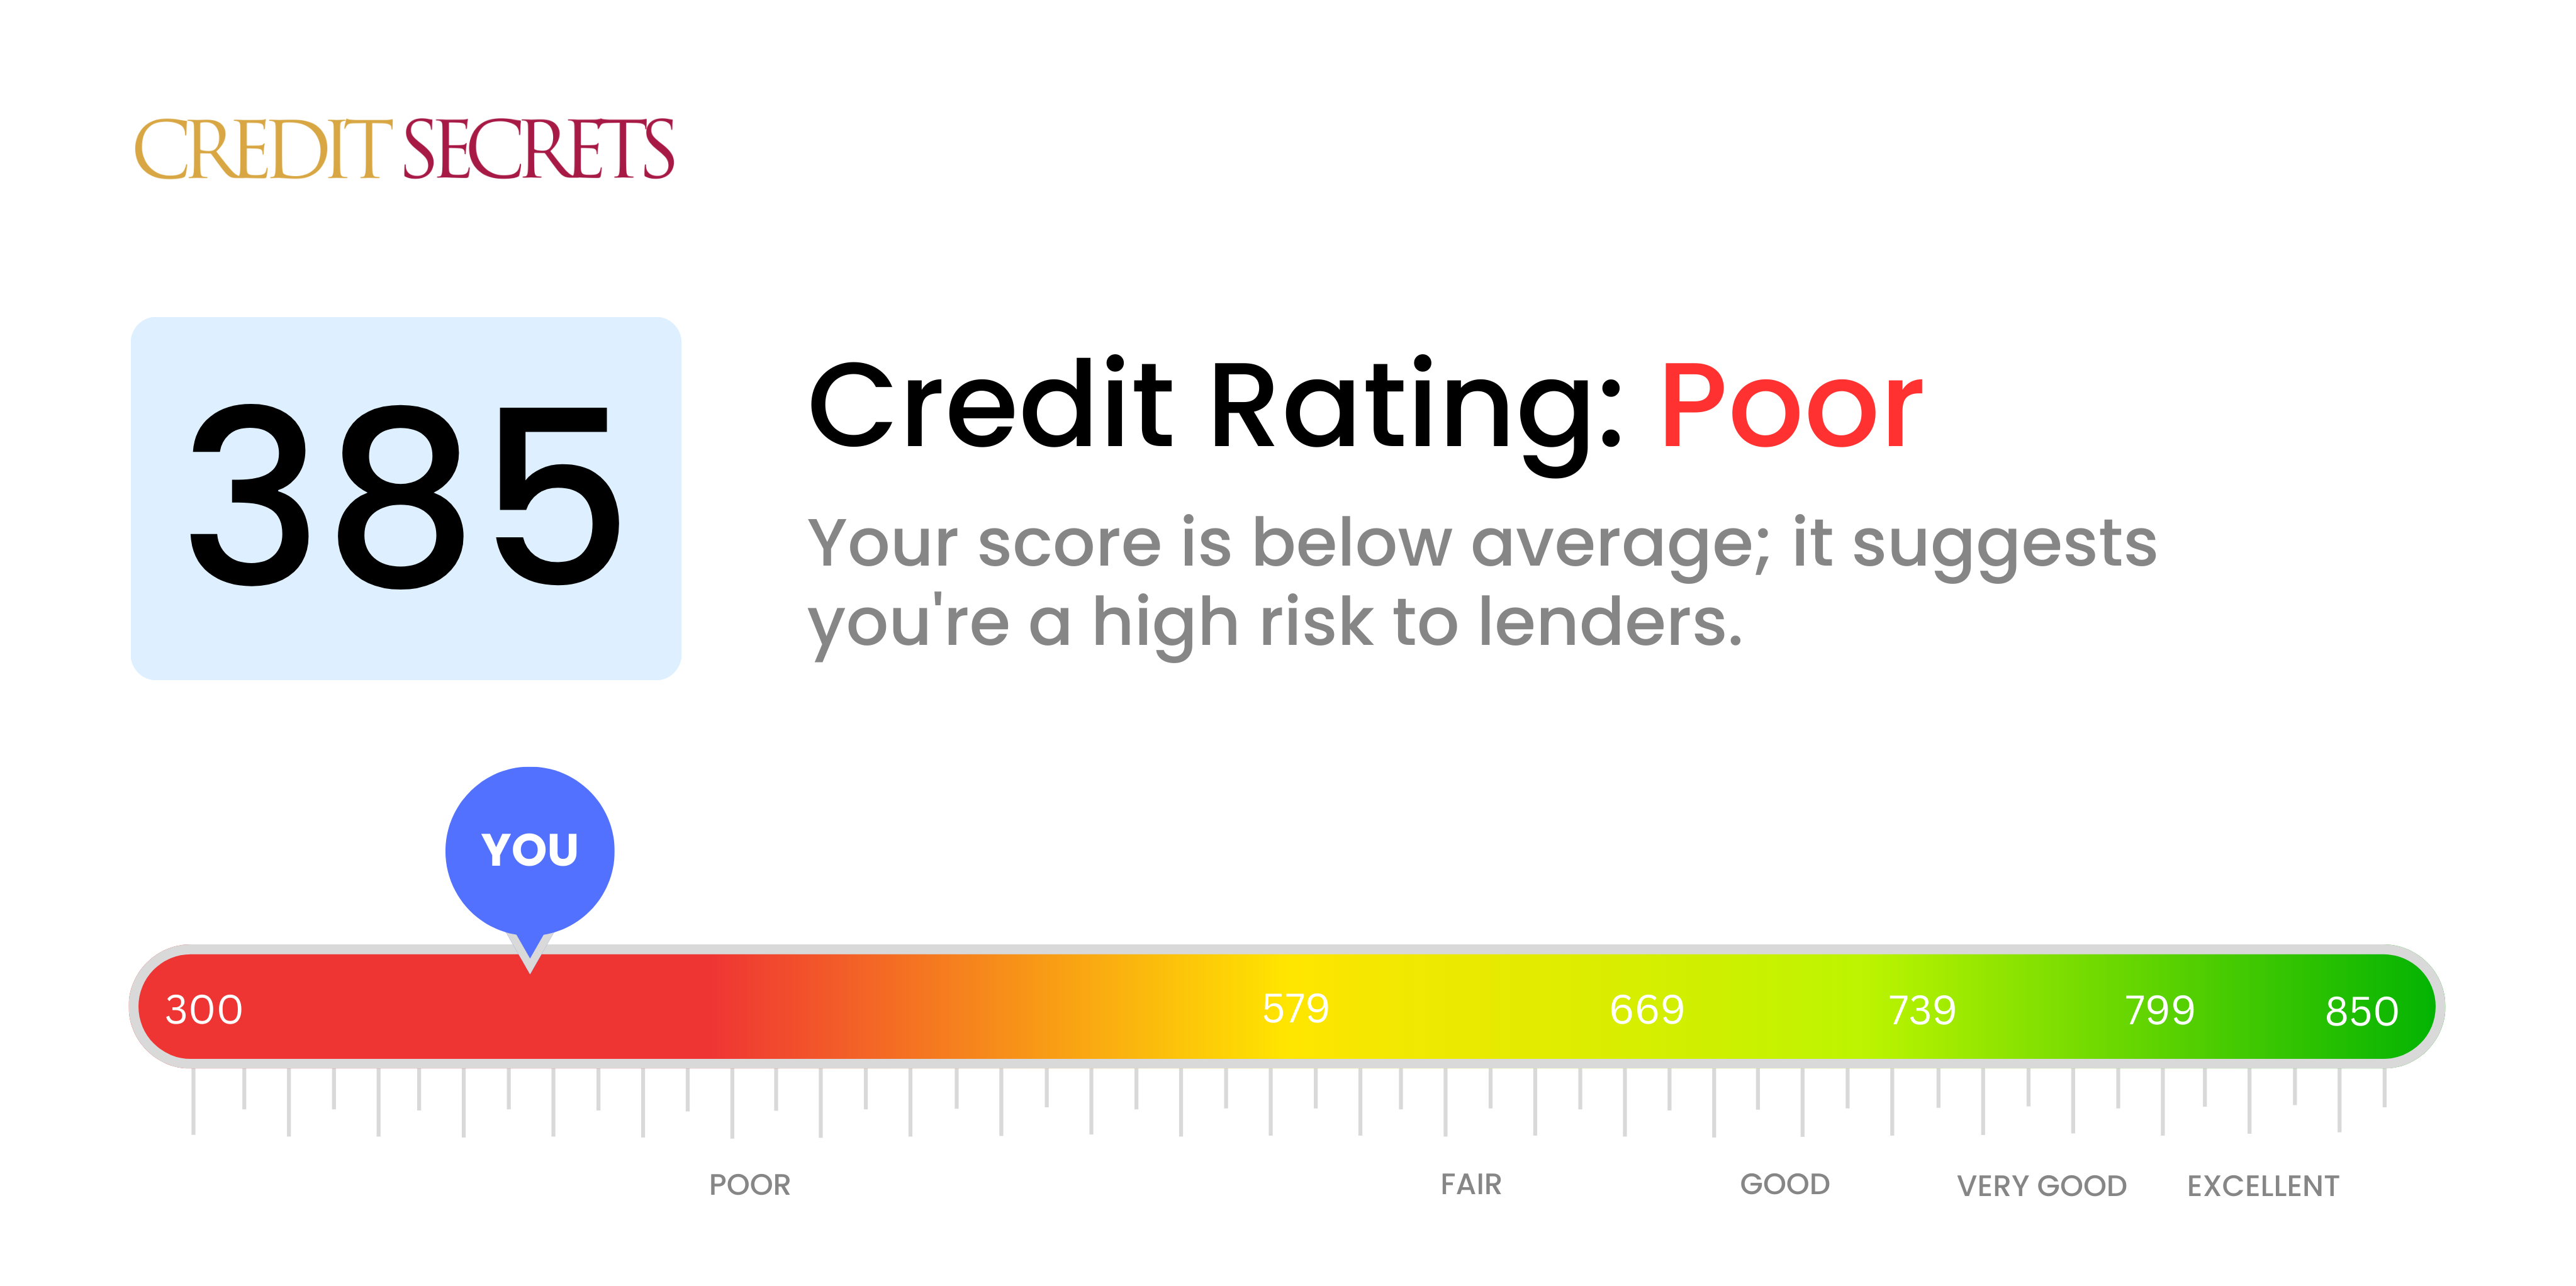 Is 385 a good credit score?